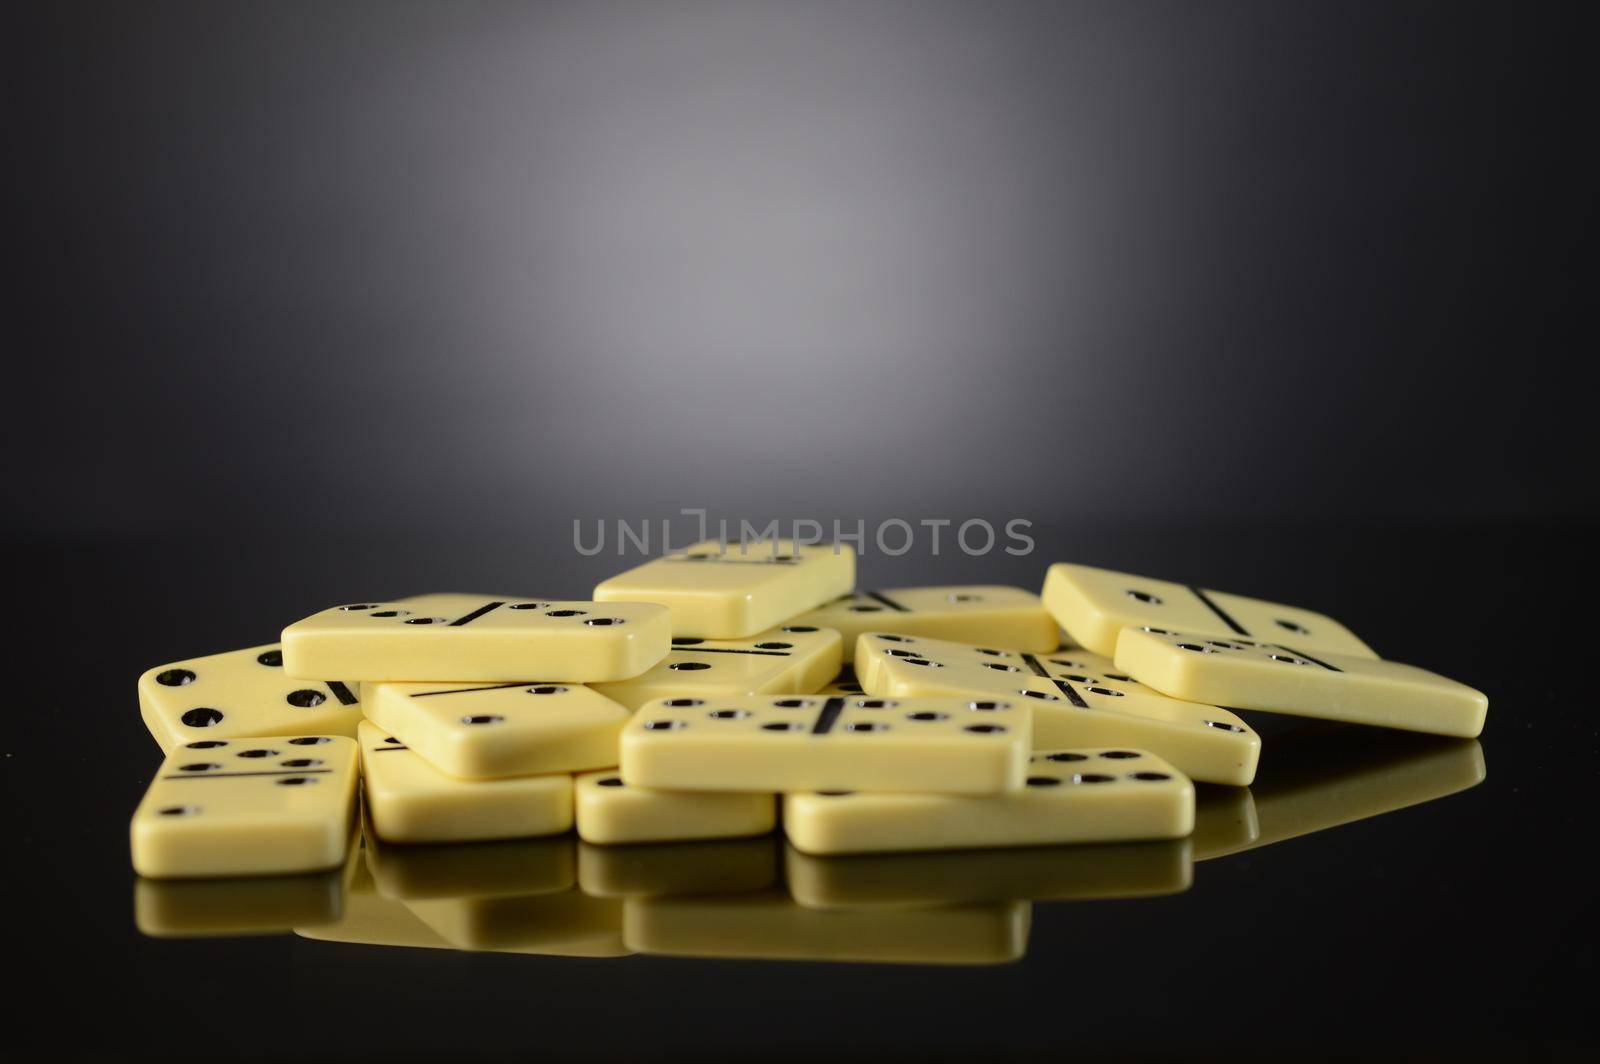 A pile of dominoes over a dark reflective surface.